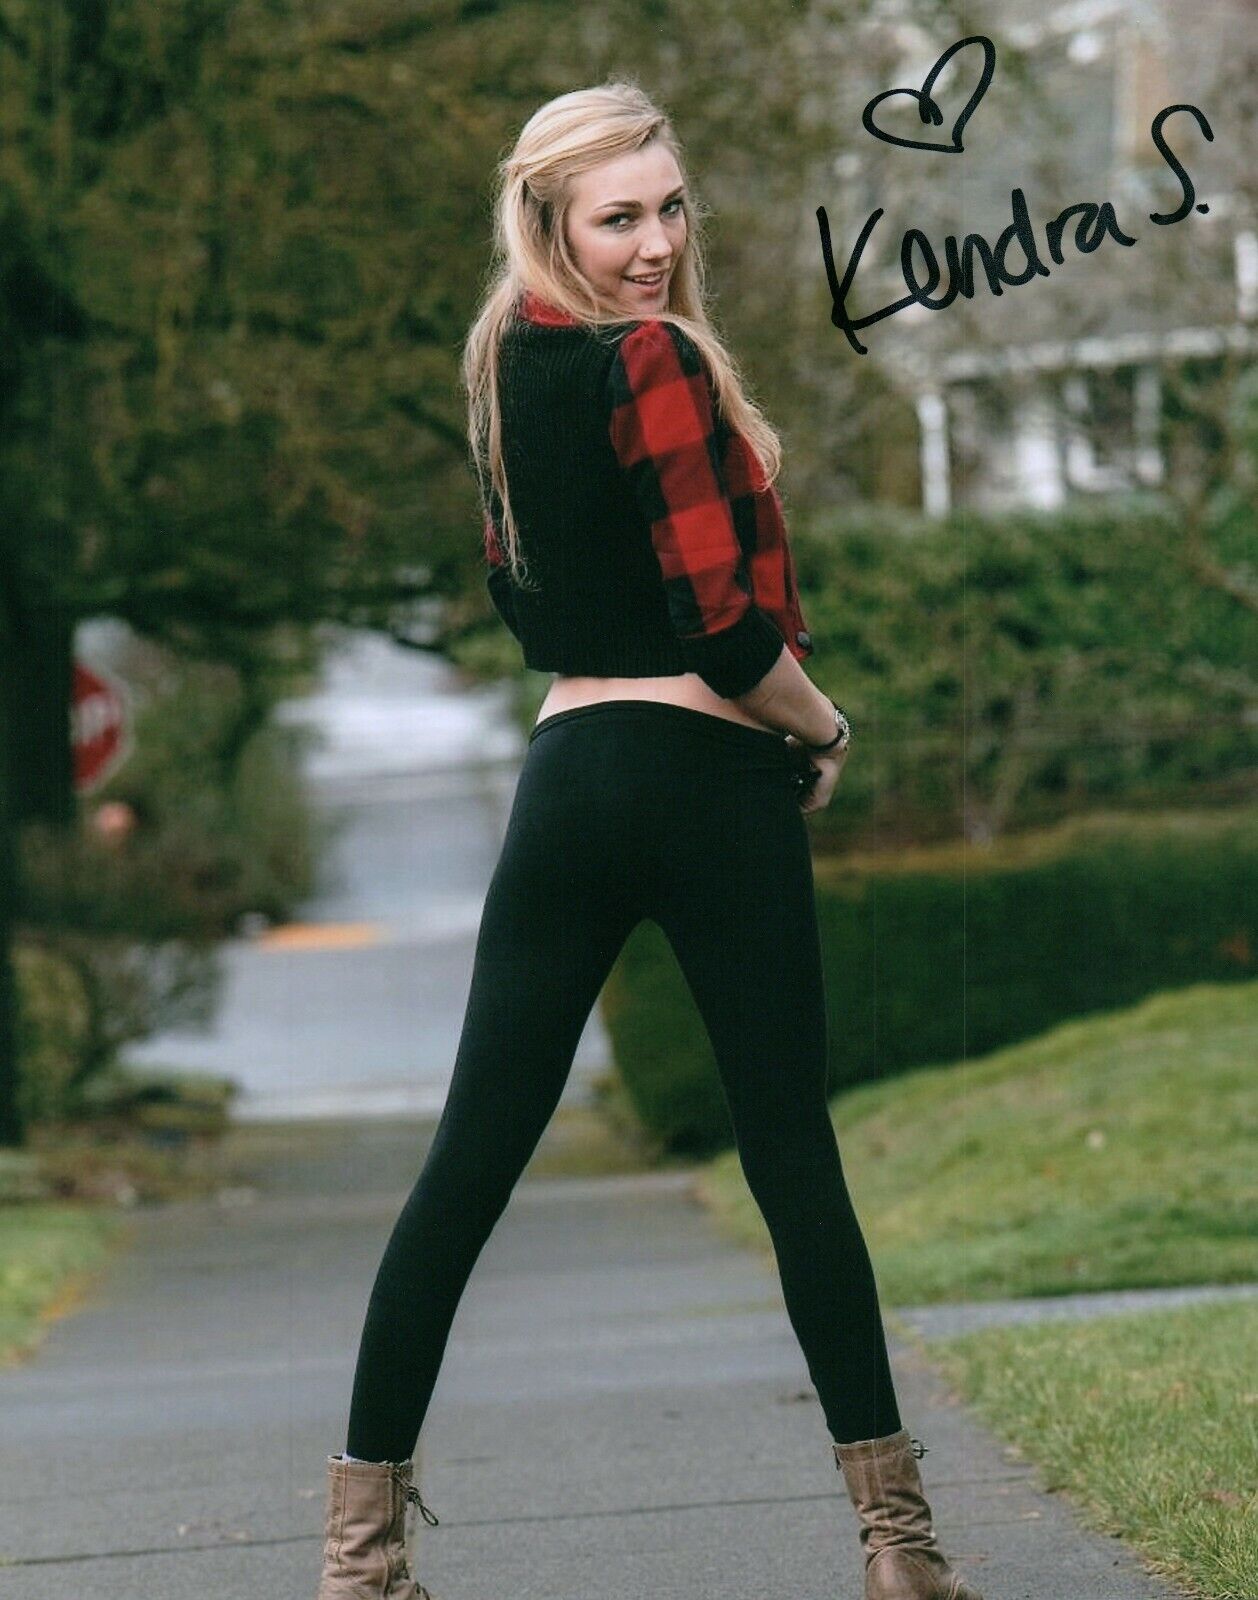 Kendra Sunderland Super Sexy Hot Signed 8x10 Adult Model Photo Poster painting COA Proof 105